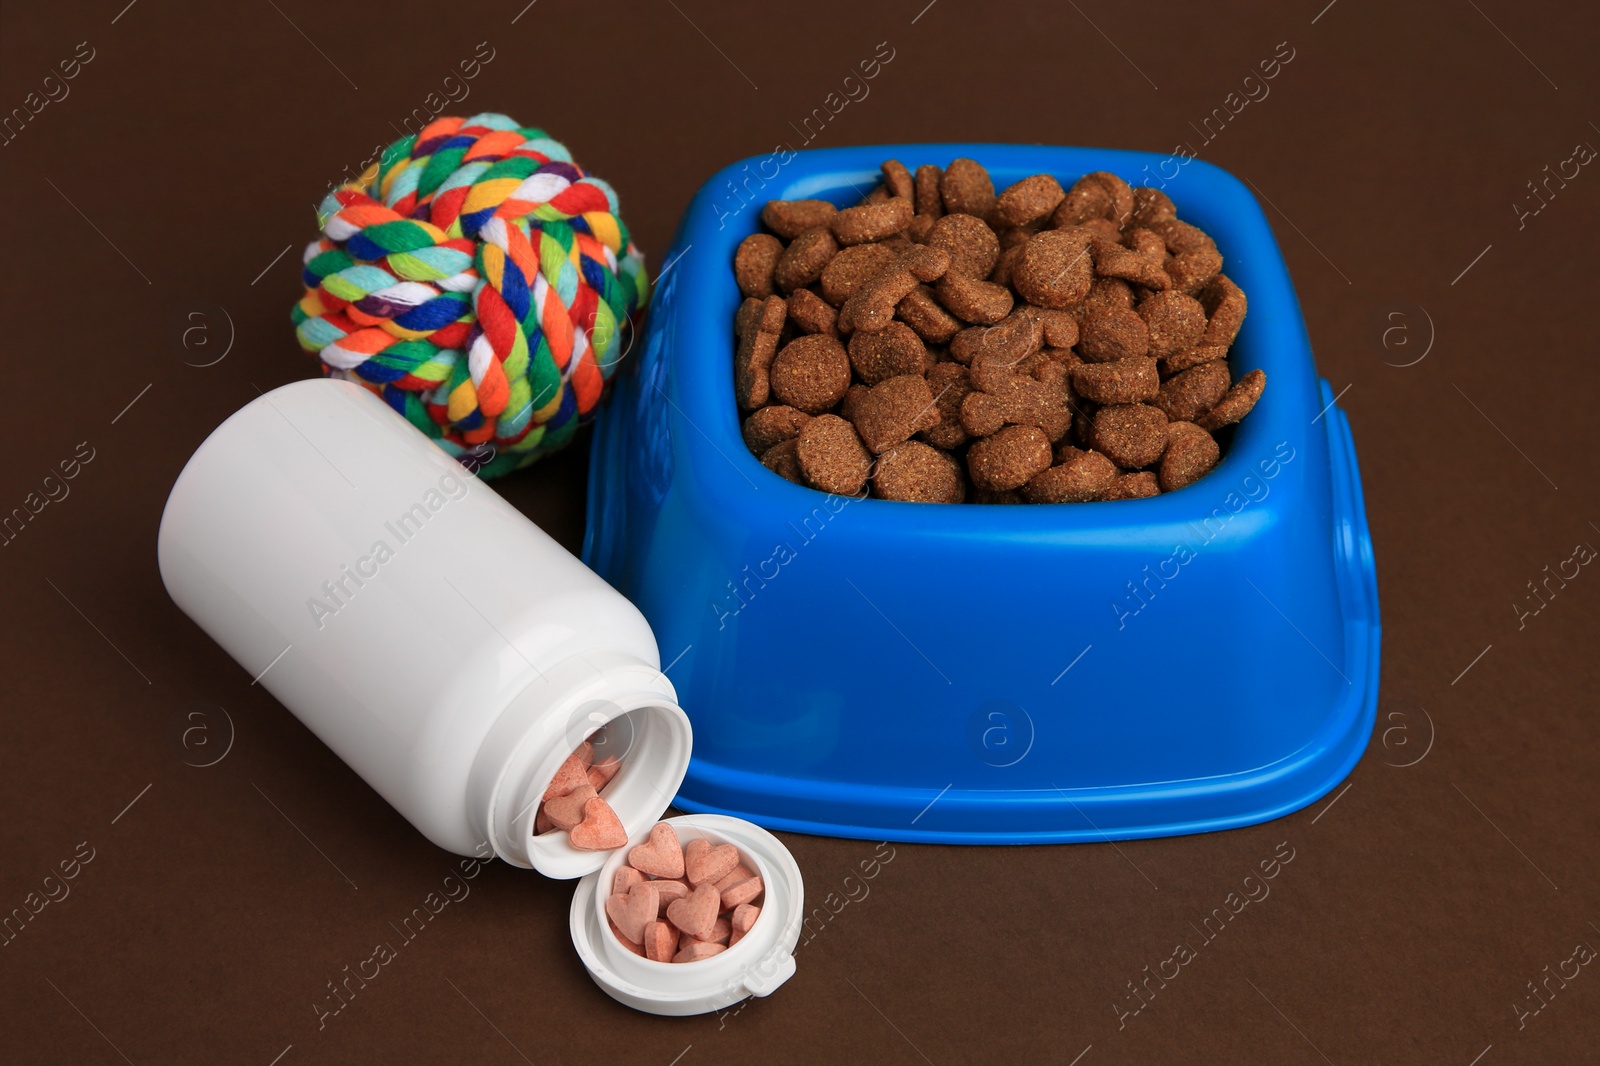 Photo of Bowl with dry pet food, bottle of vitamins and toy on brown background